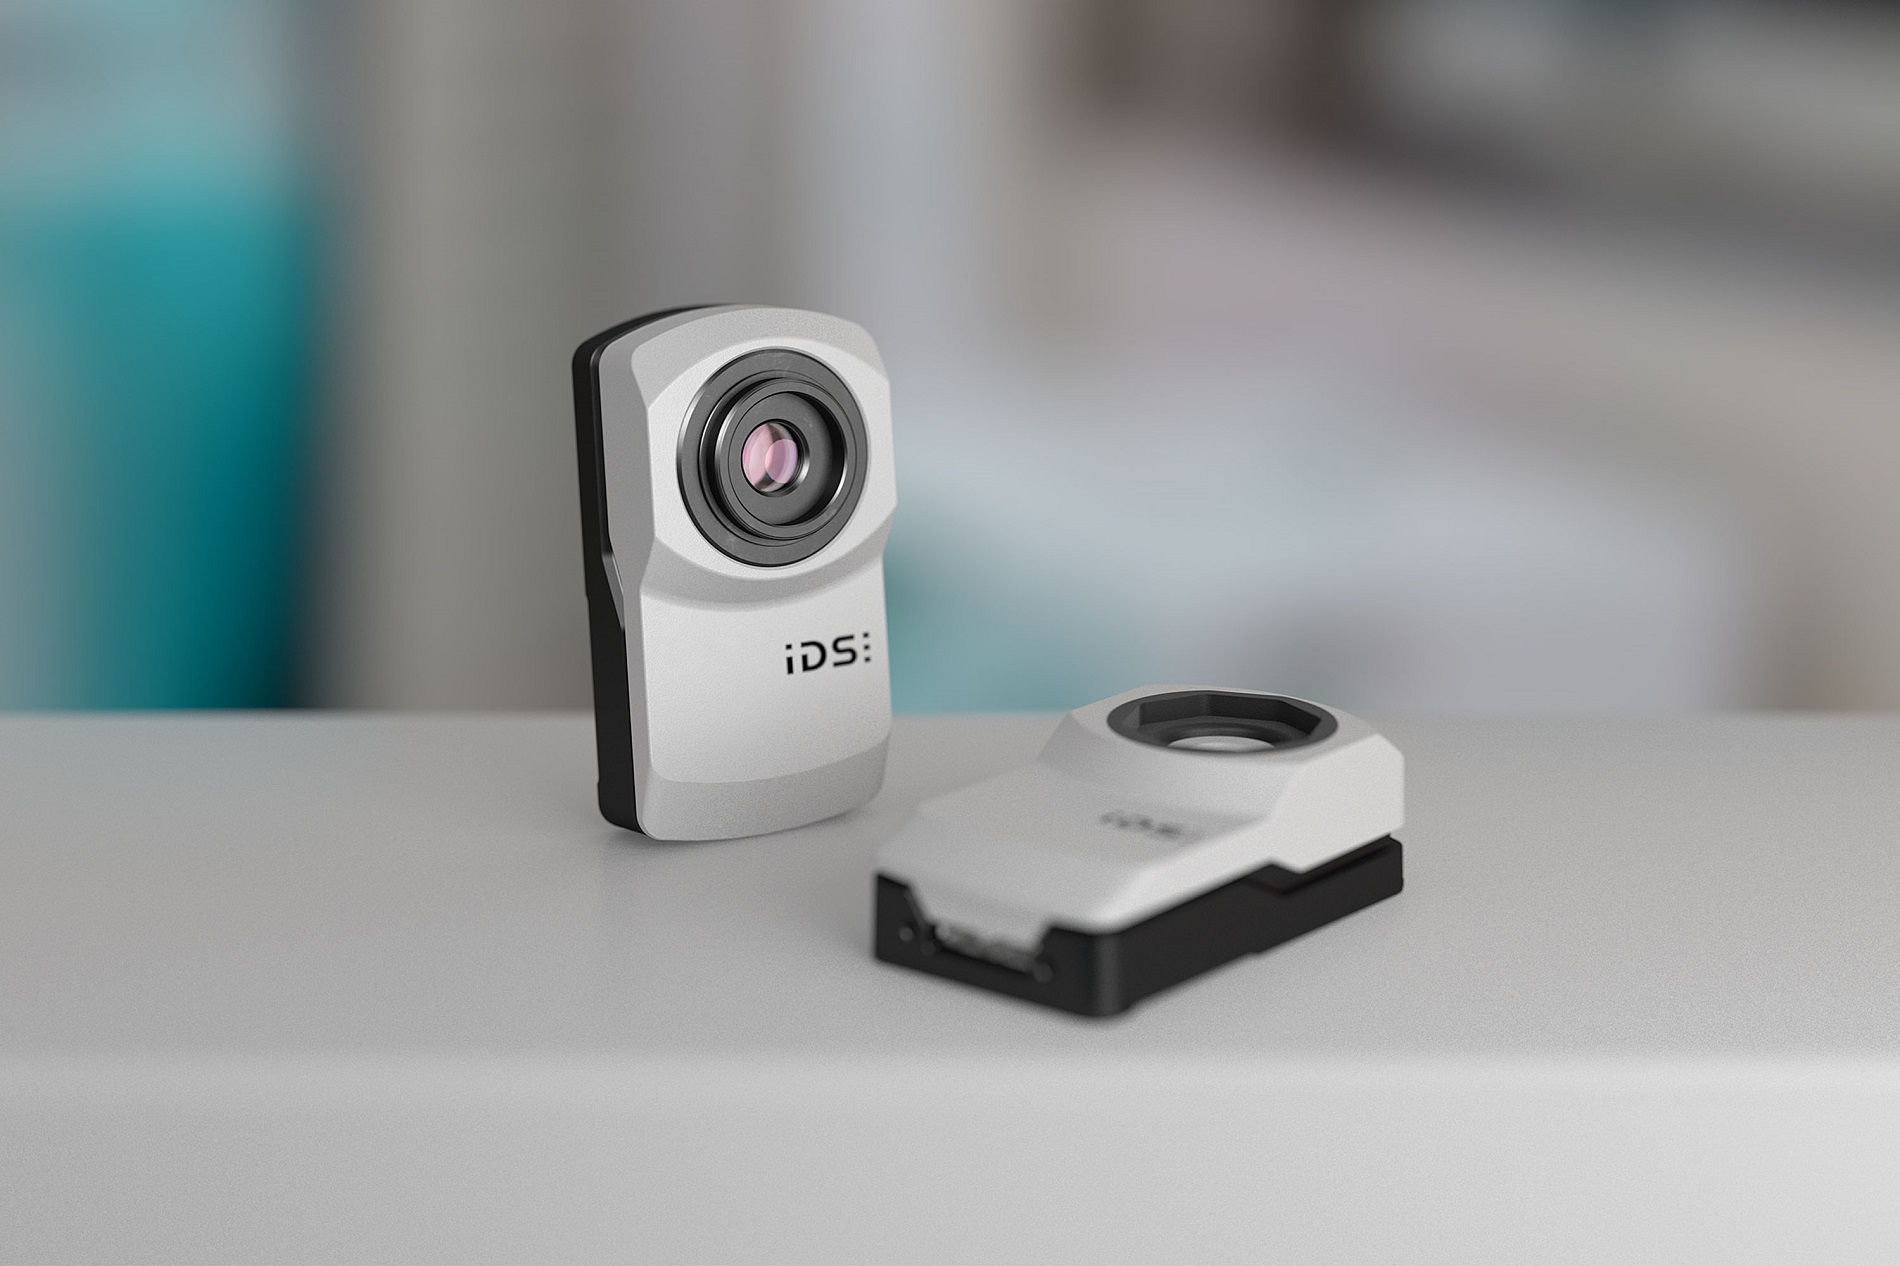 uEye XC from IDS closes the market gap between industrial camera and webcam